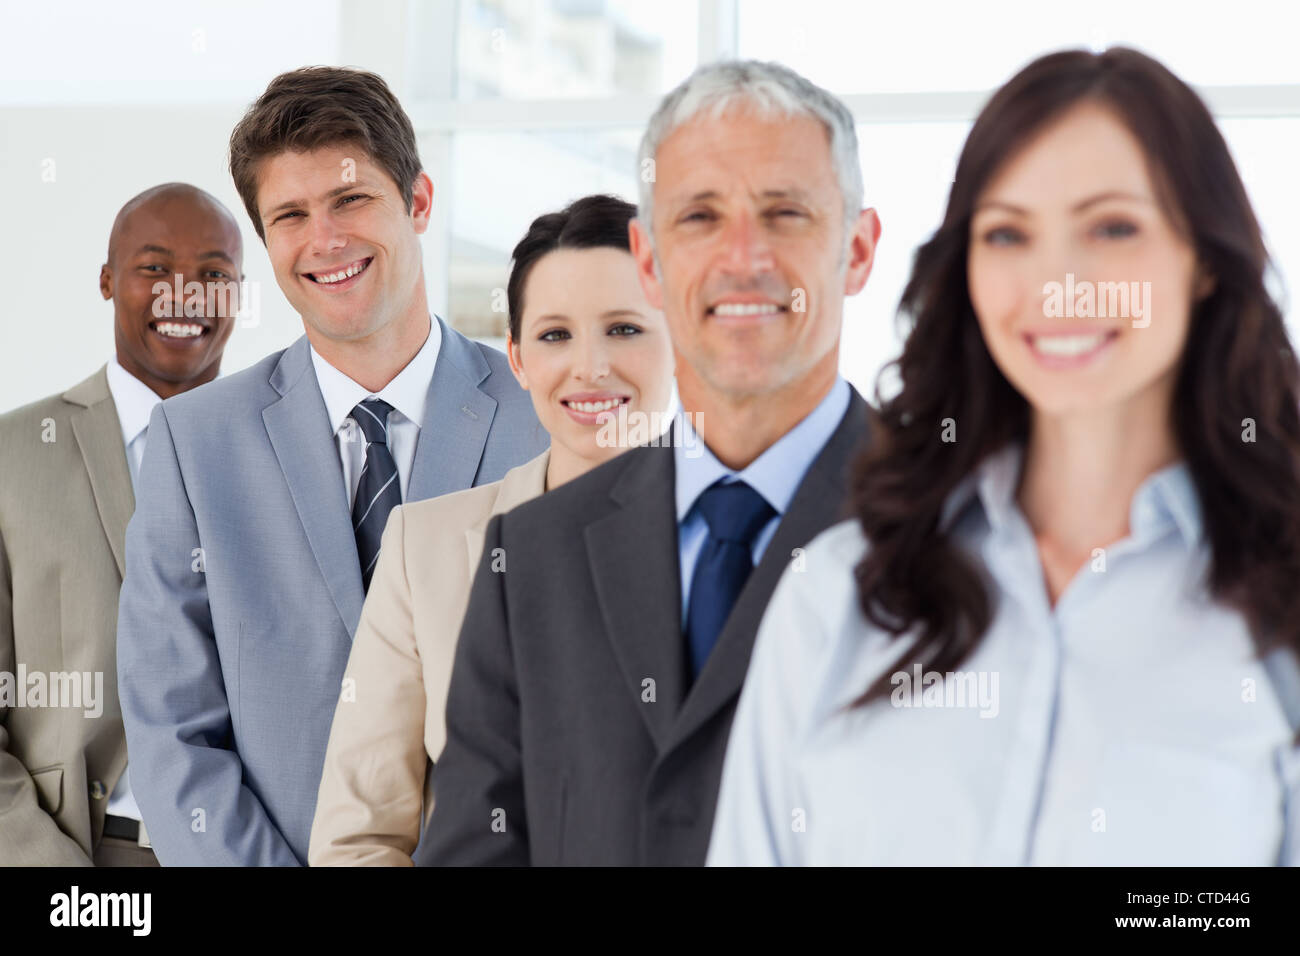 Three smiling business people in the background following their leaders Stock Photo